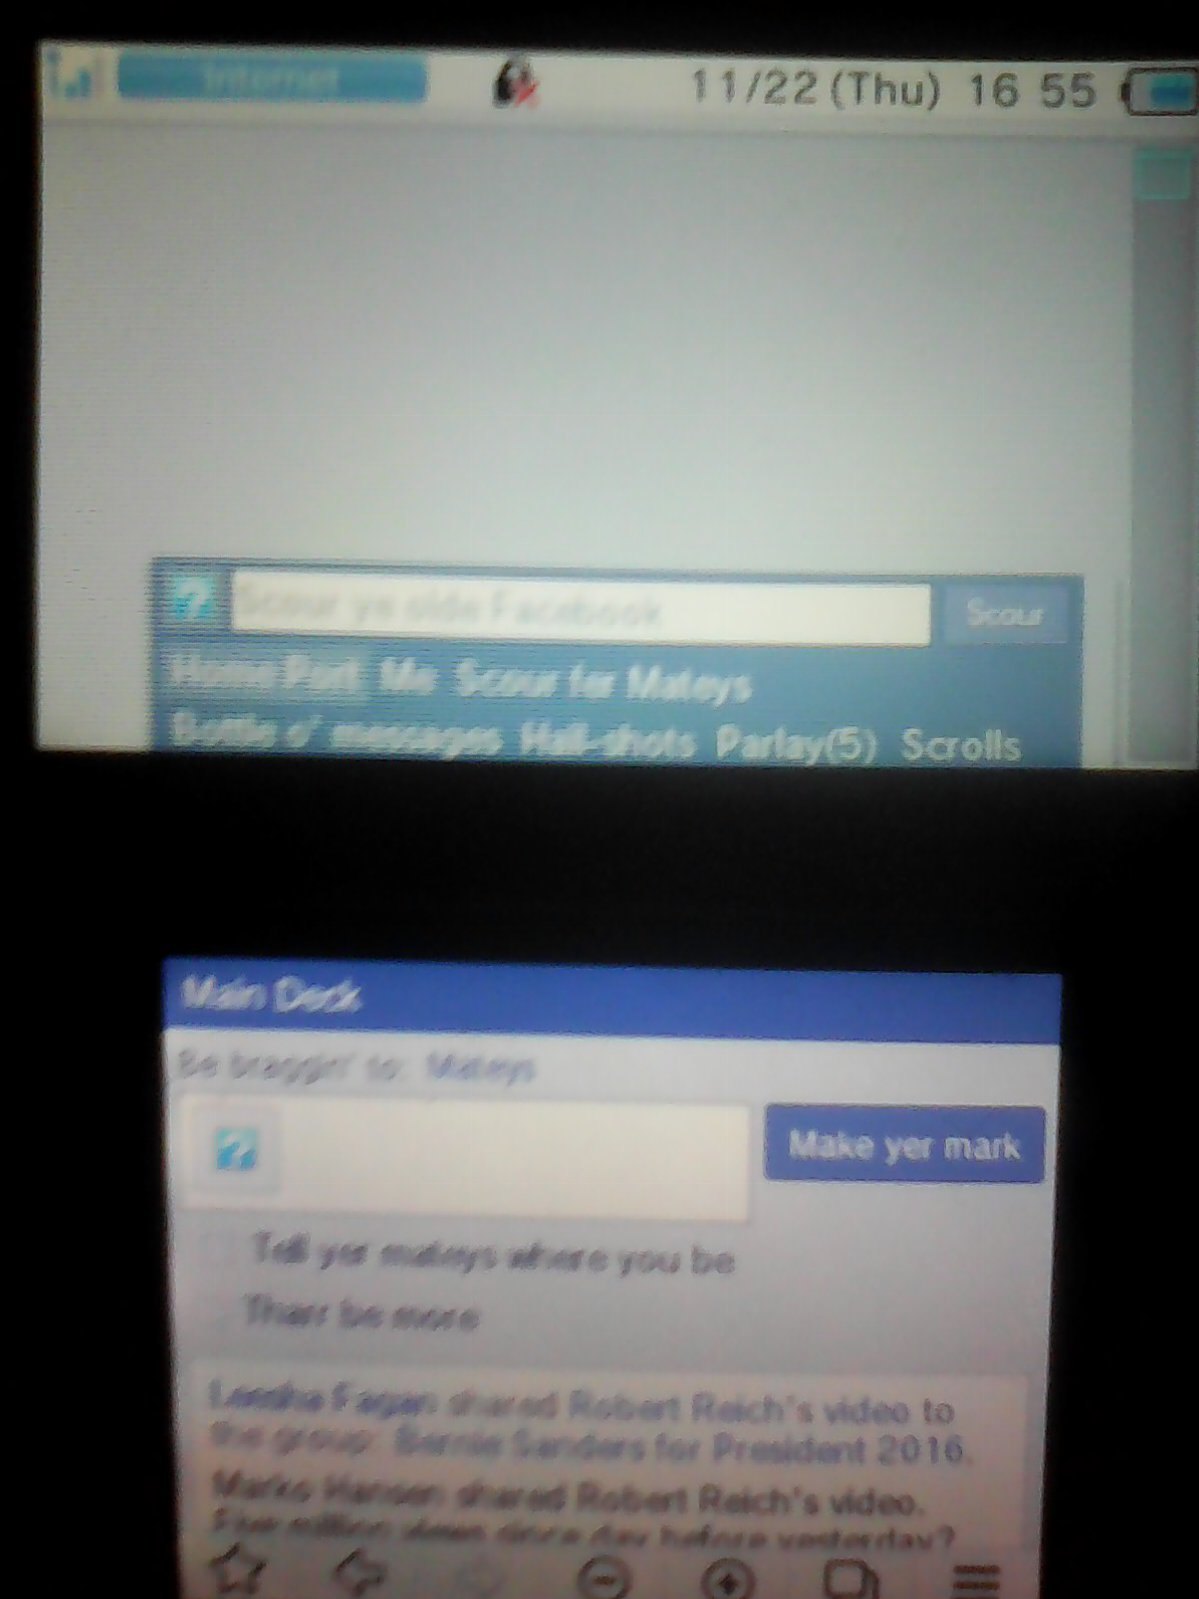 New 3DS XL top screen suddenly washed out and pixelated